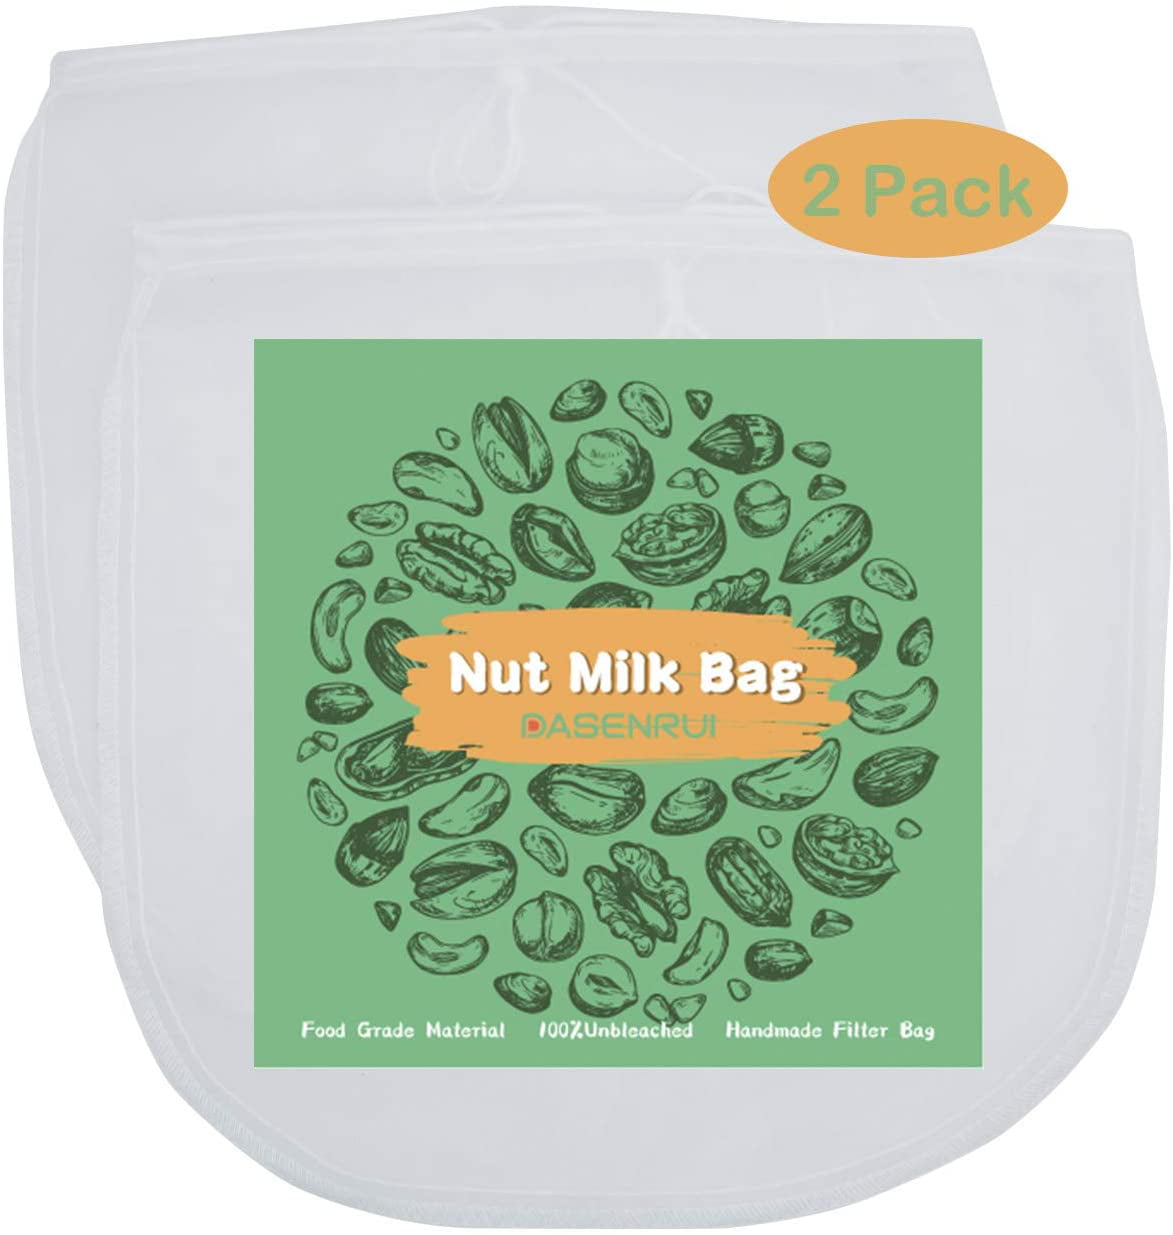 Natures Zone Nut Milk Bag x 2 Reusable Large 12” x 12” Mesh Filter Strainer to 